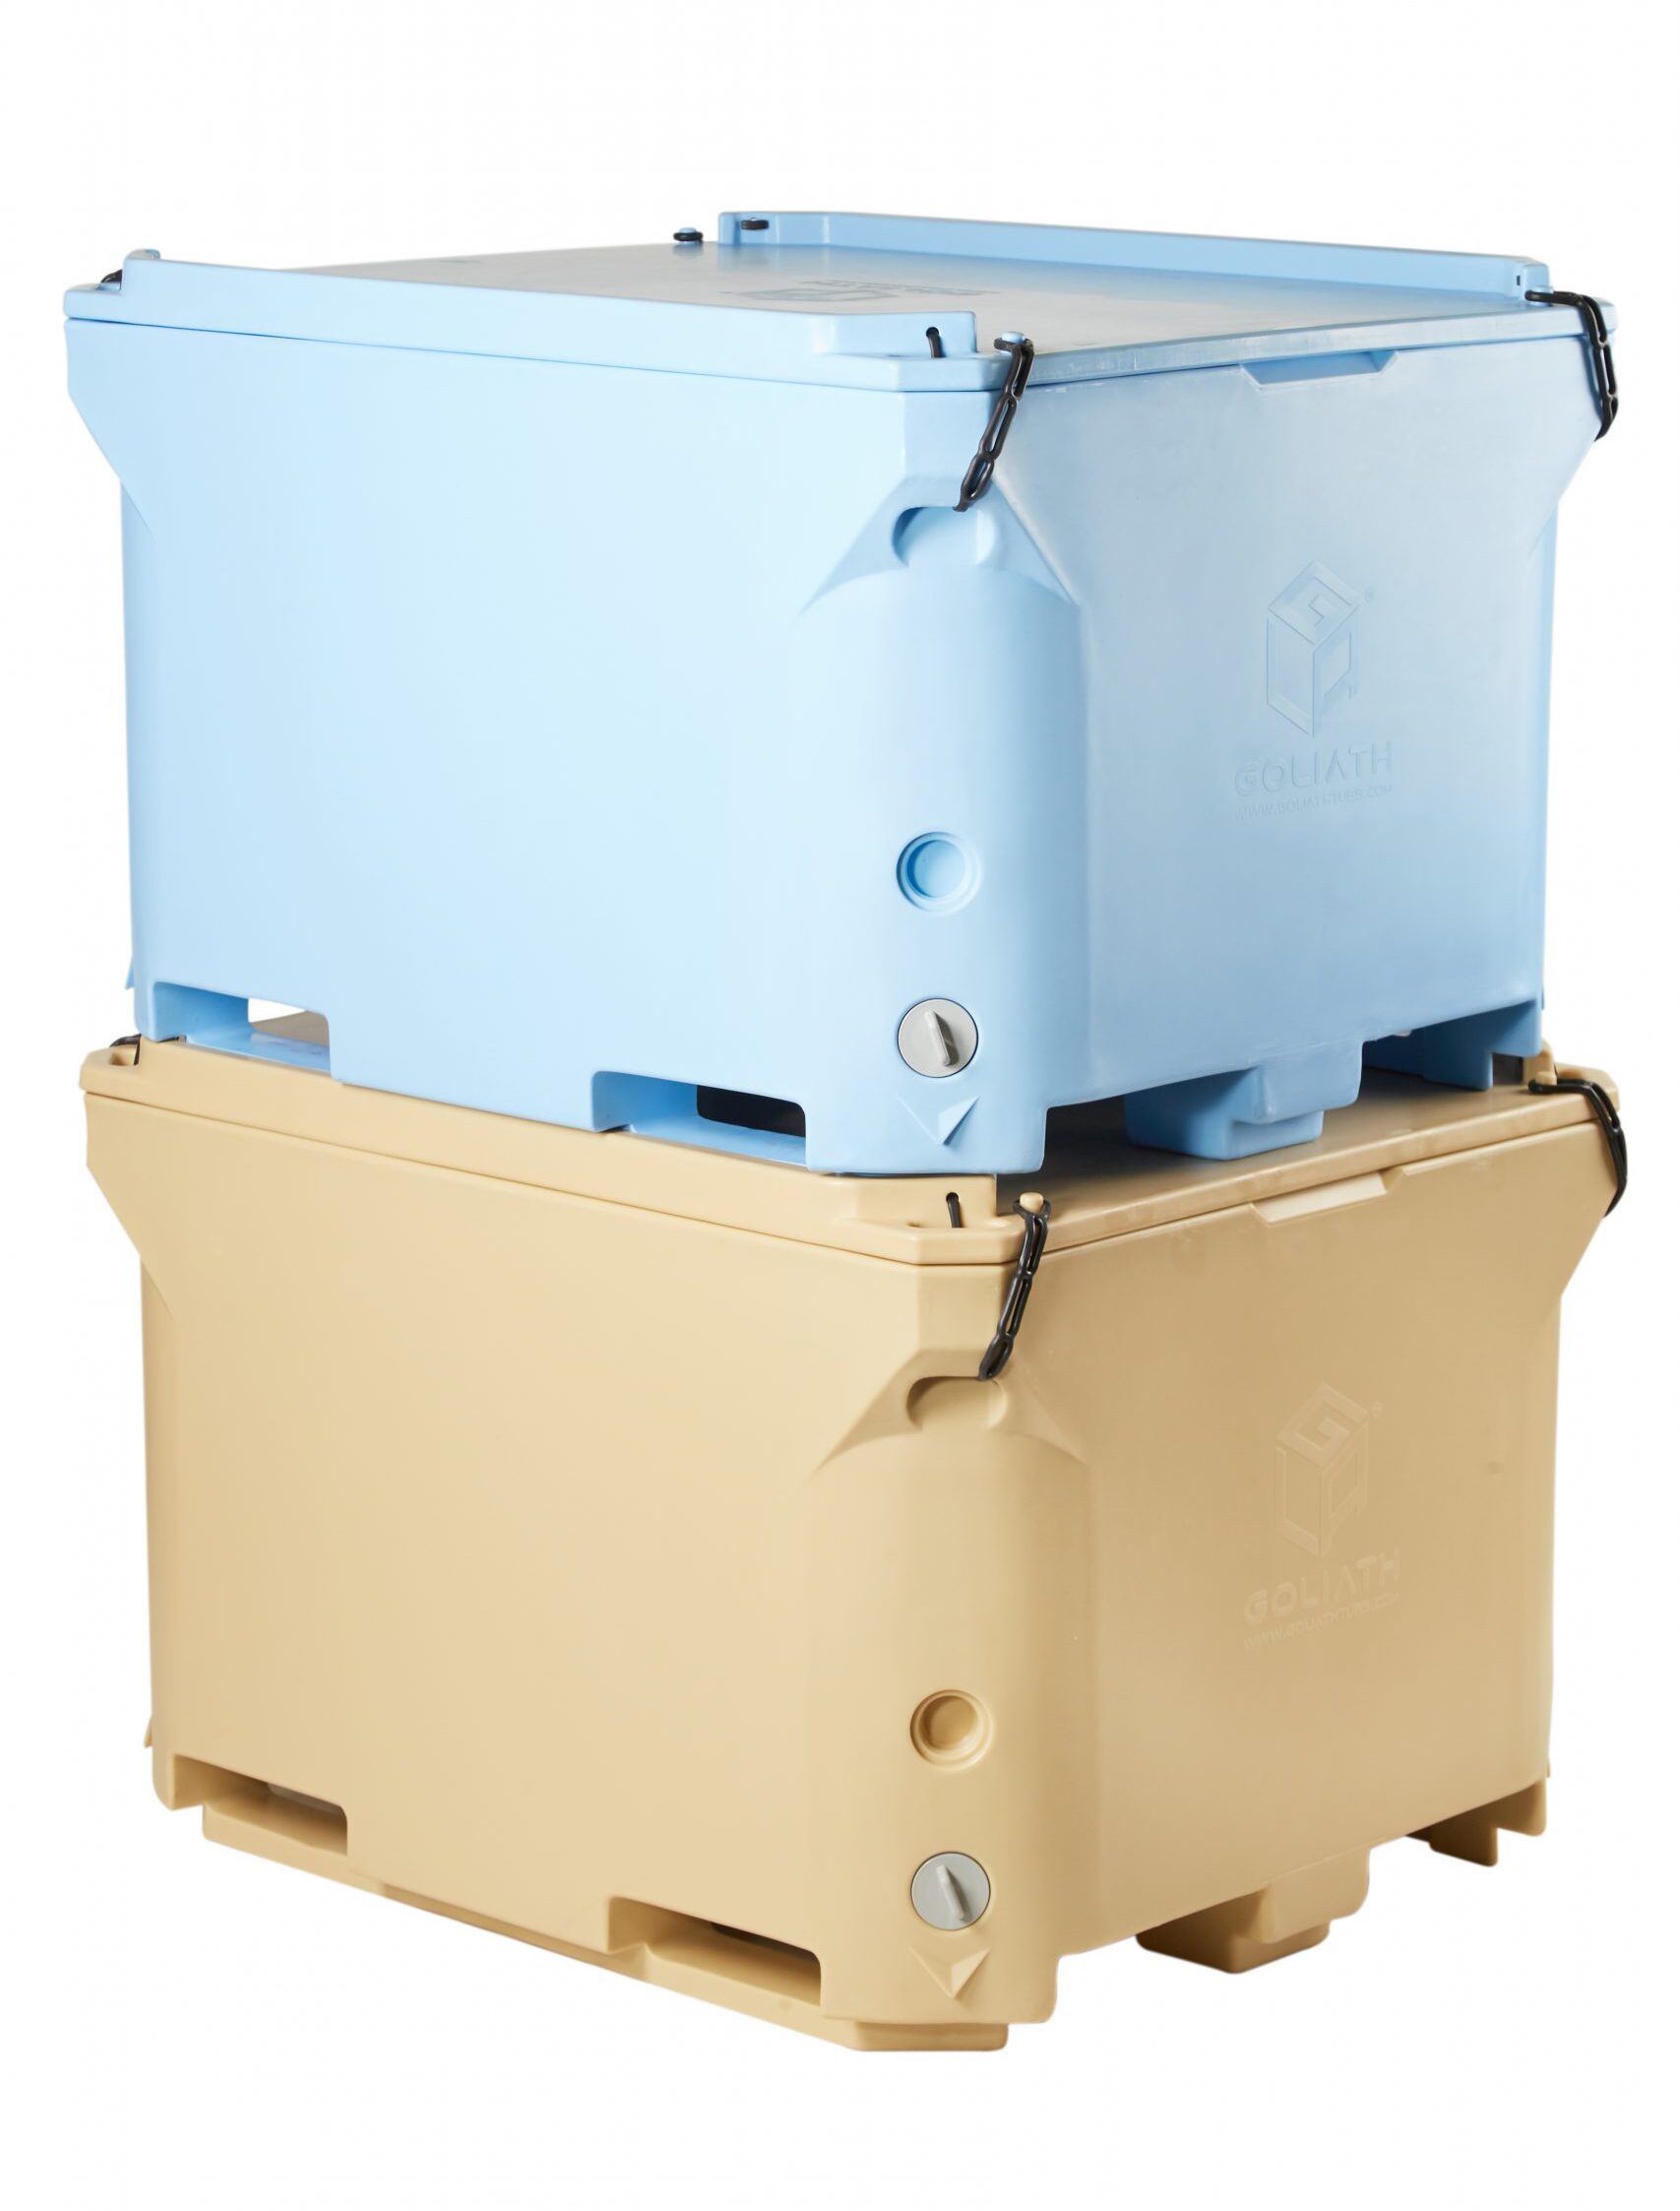 Skyblue and grey color insulated fish box